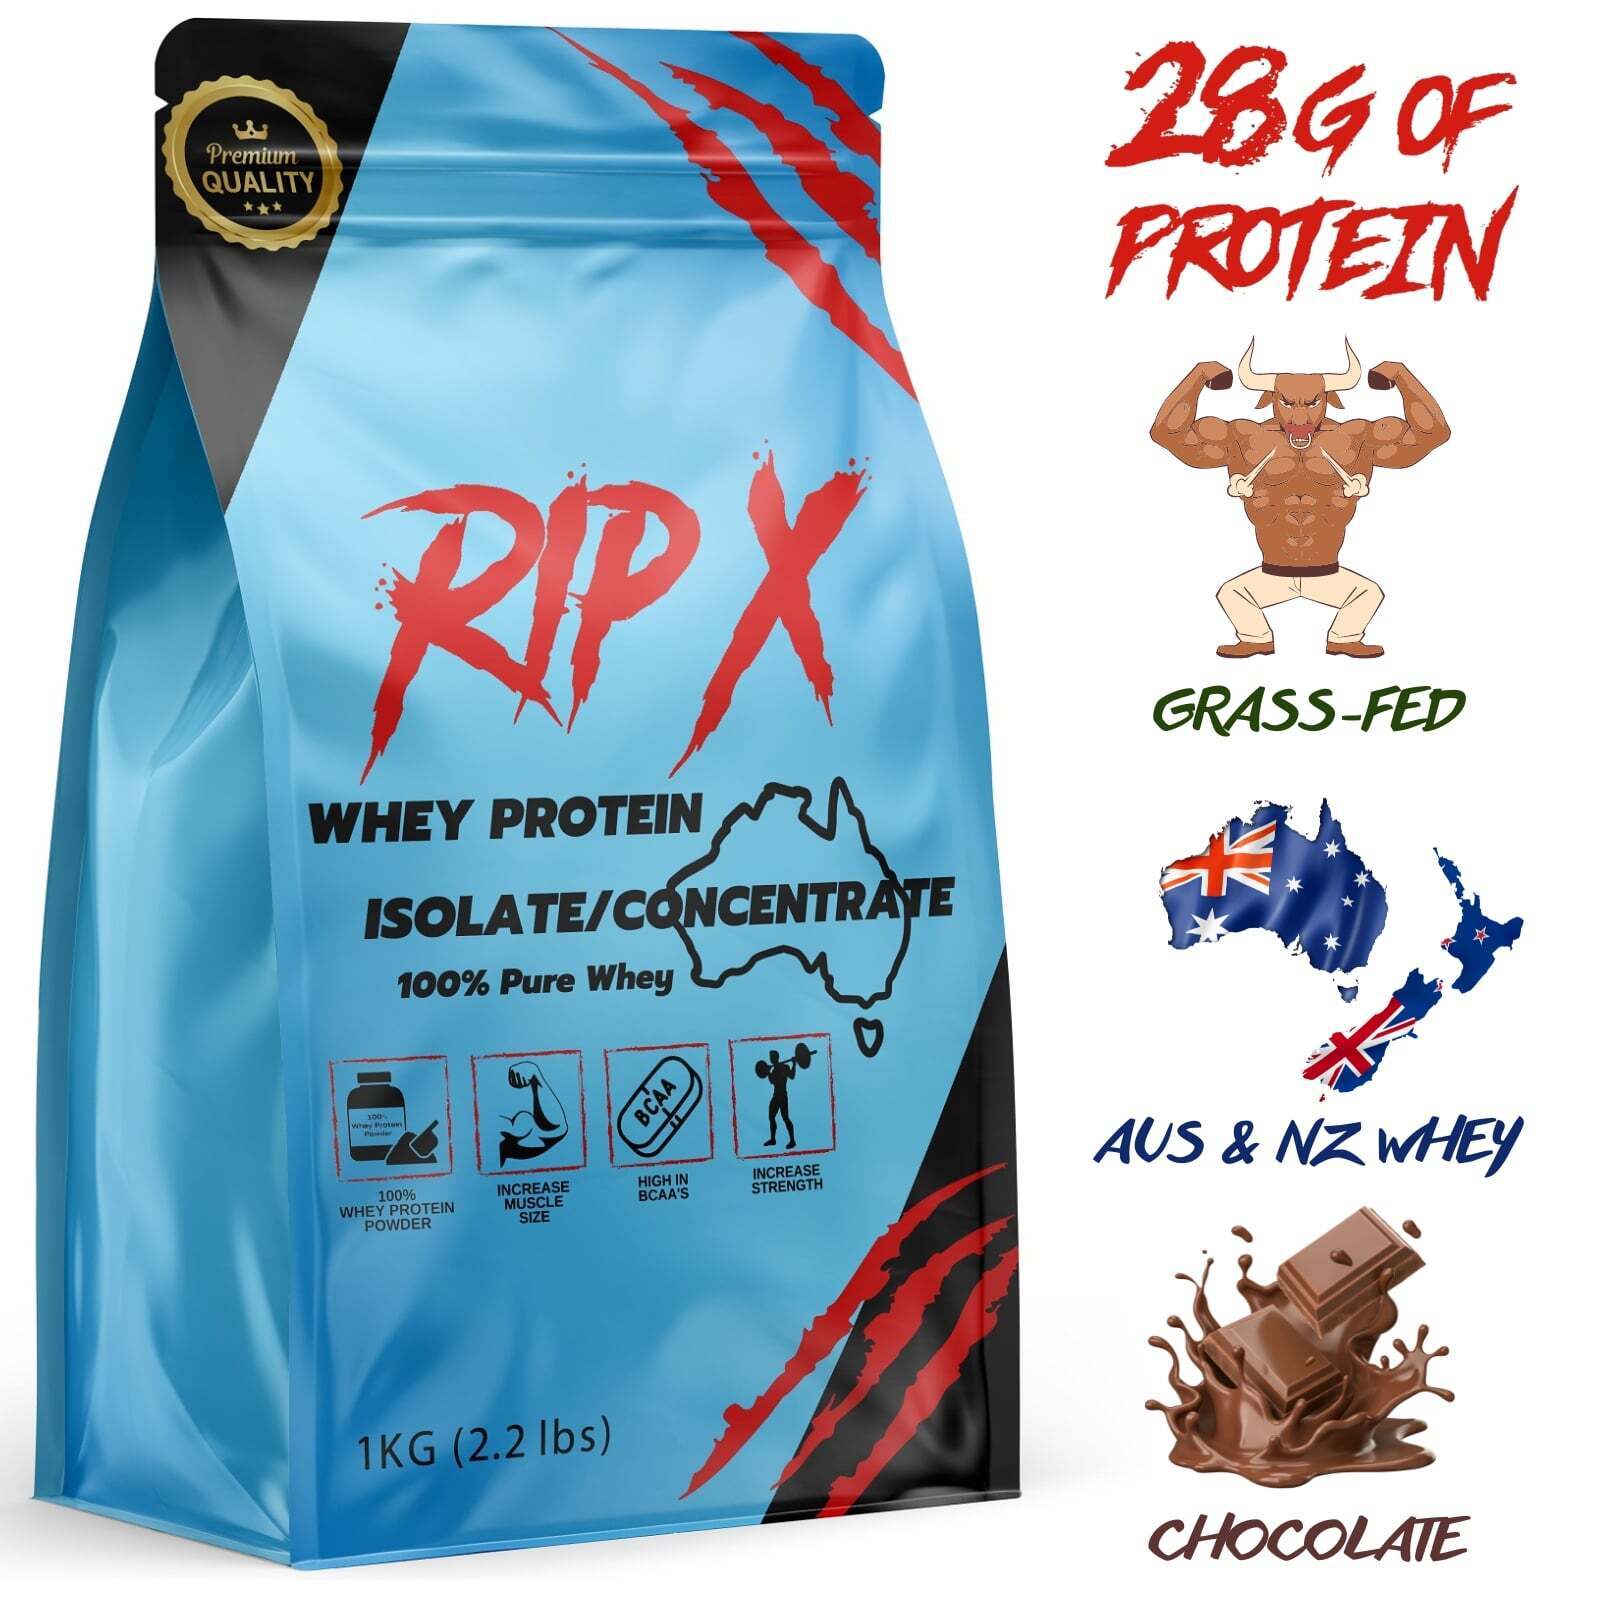 Whey Protein Concentrate / Isolate Powder CHOCOLATE WPI WPC Grass-Fed